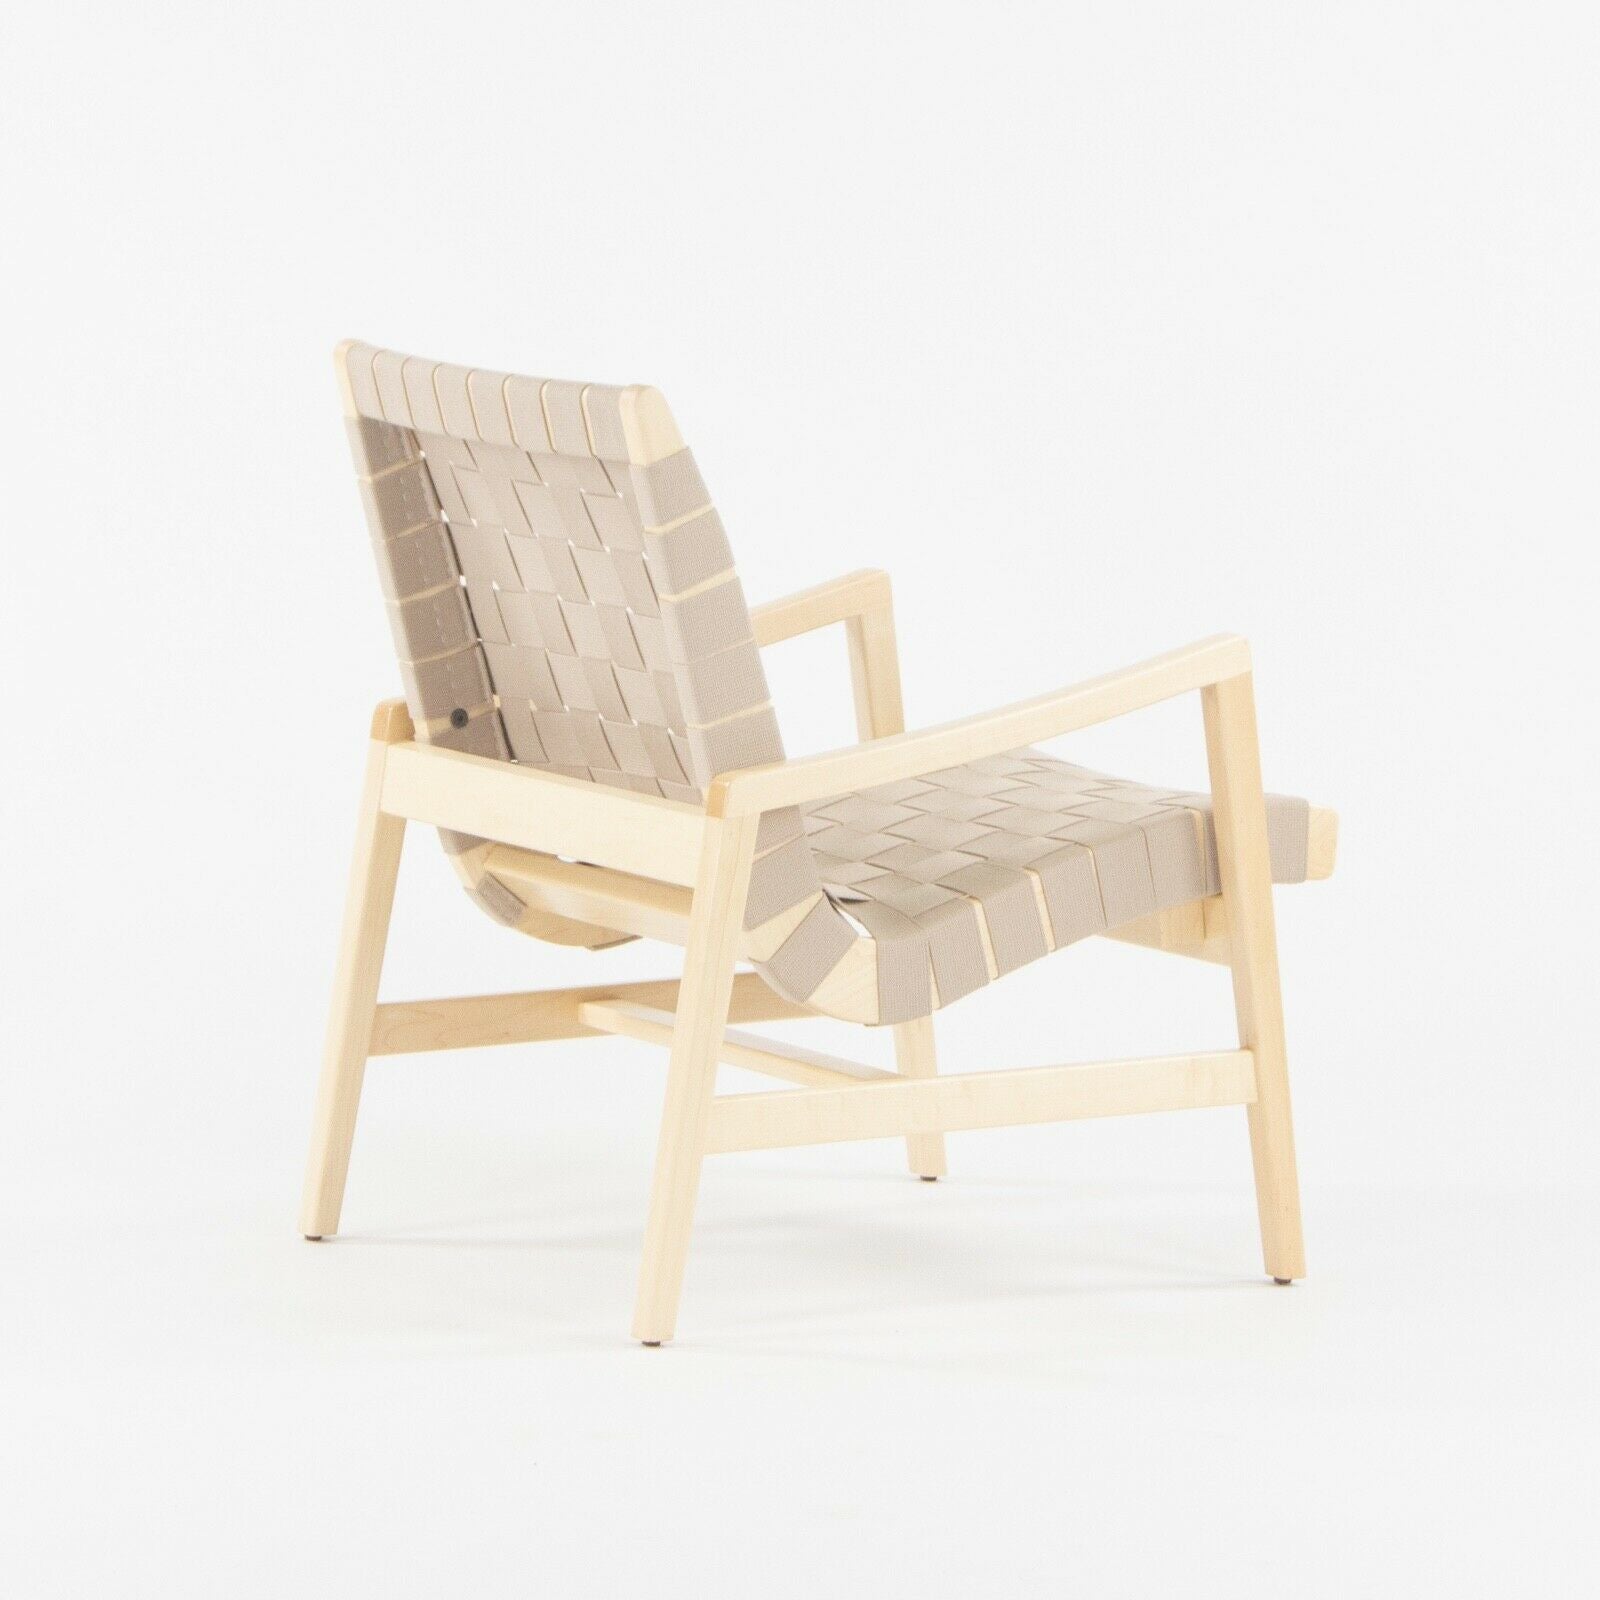 SOLD 2021 Jens Risom for Knoll Lounge Chair with Arms in Maple Frame & Flax Webbing